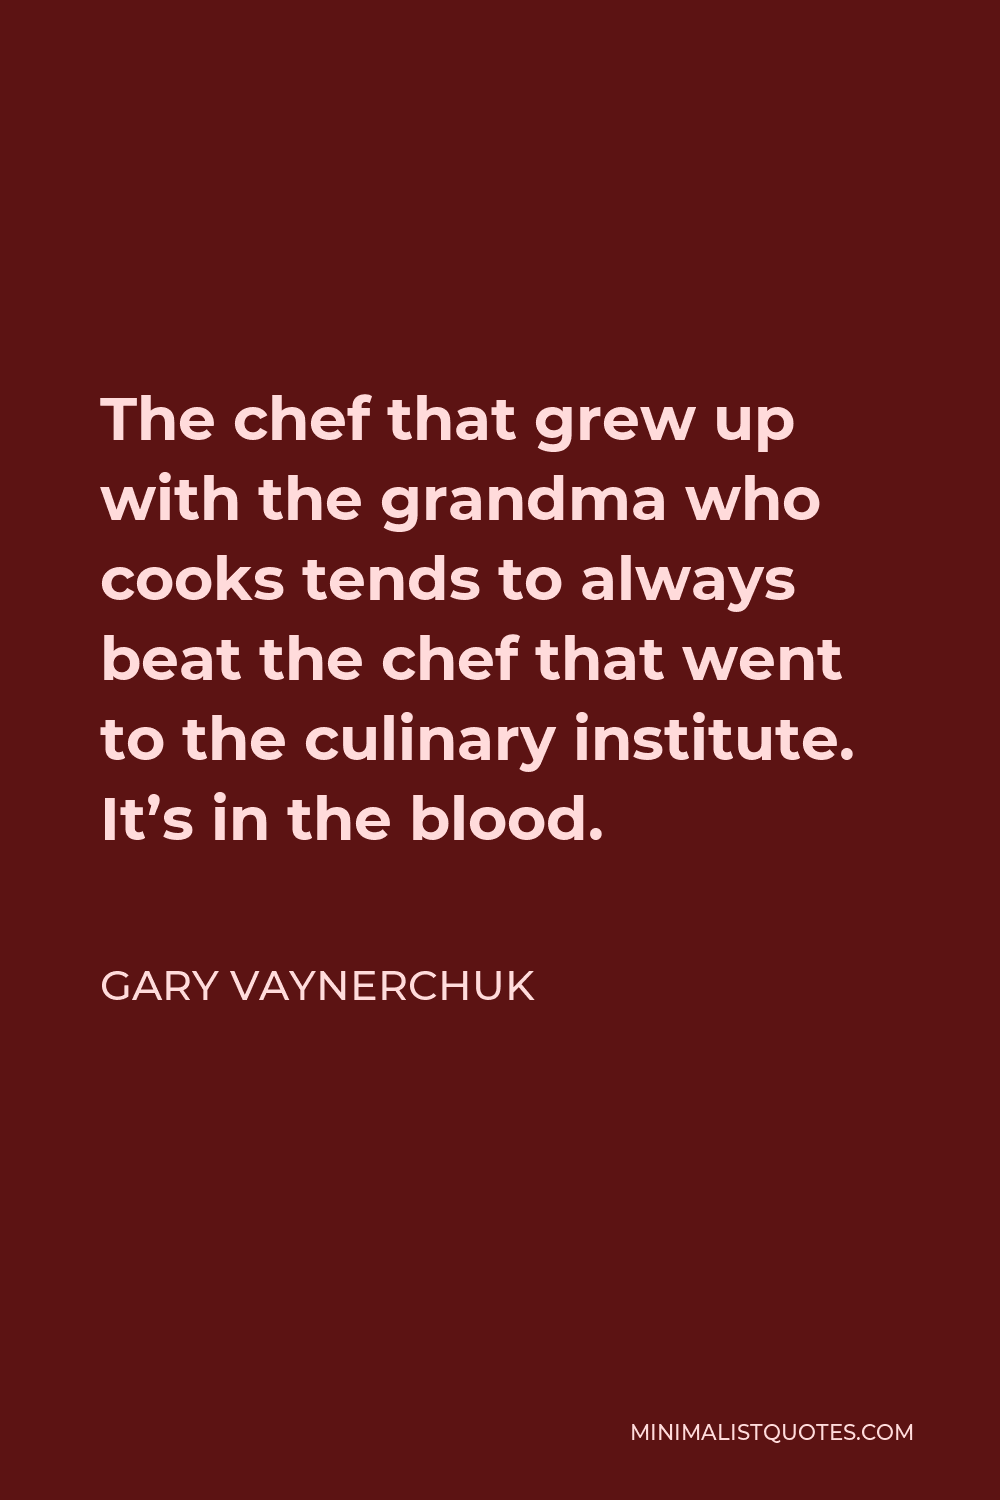 Gary Vaynerchuk Quote - The chef that grew up with the grandma who cooks tends to always beat the chef that went to the culinary institute. It’s in the blood.